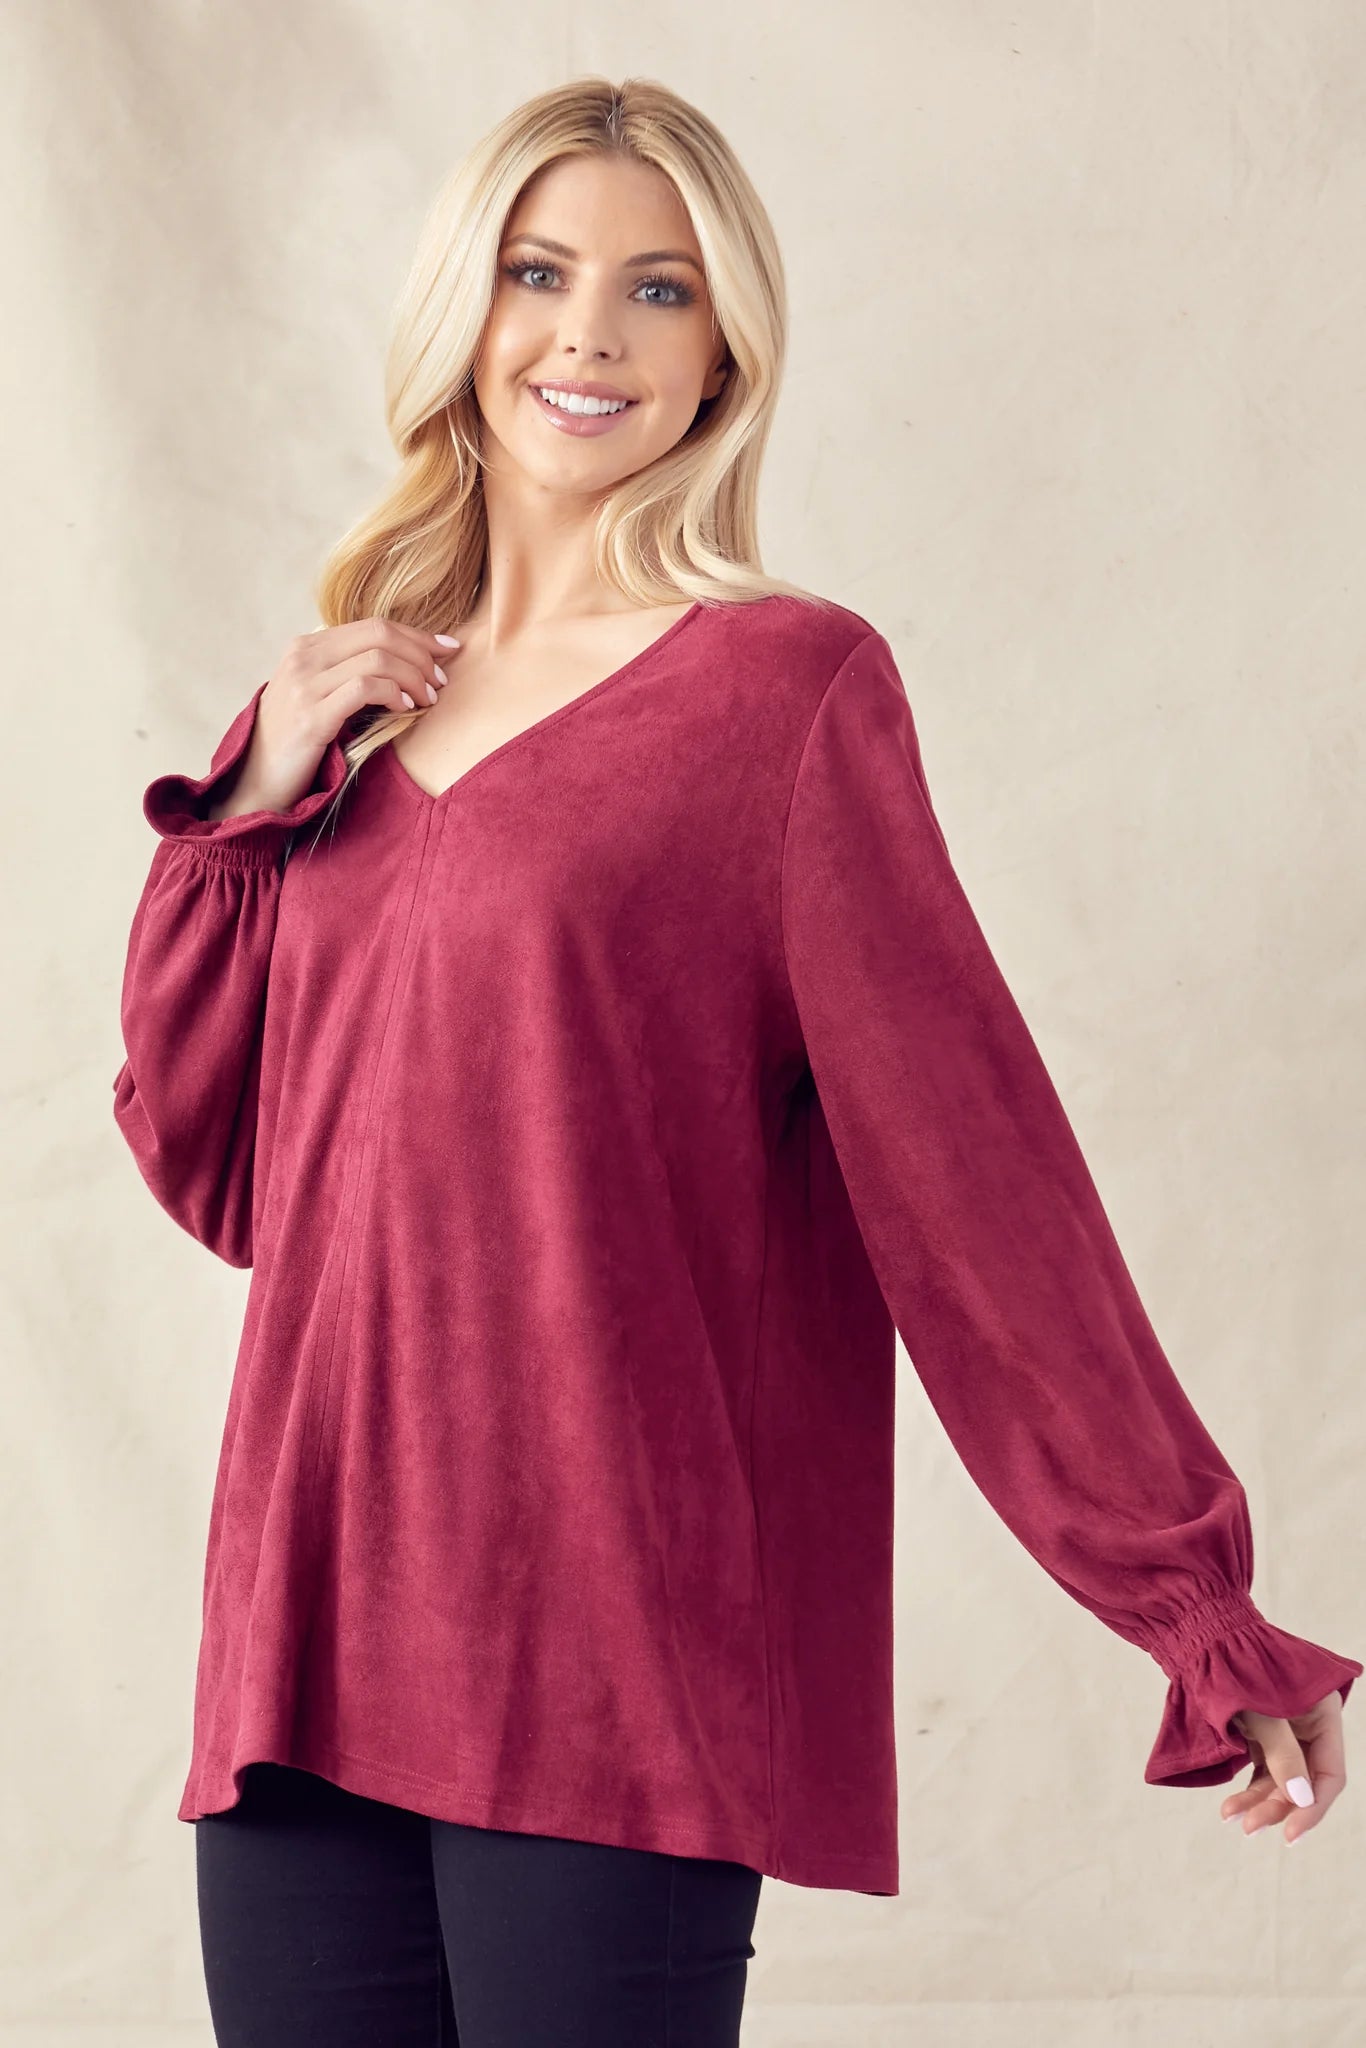 JOH  ABIGAIL STRETCH SUEDE TOP - WINE RED - 21134AWIN